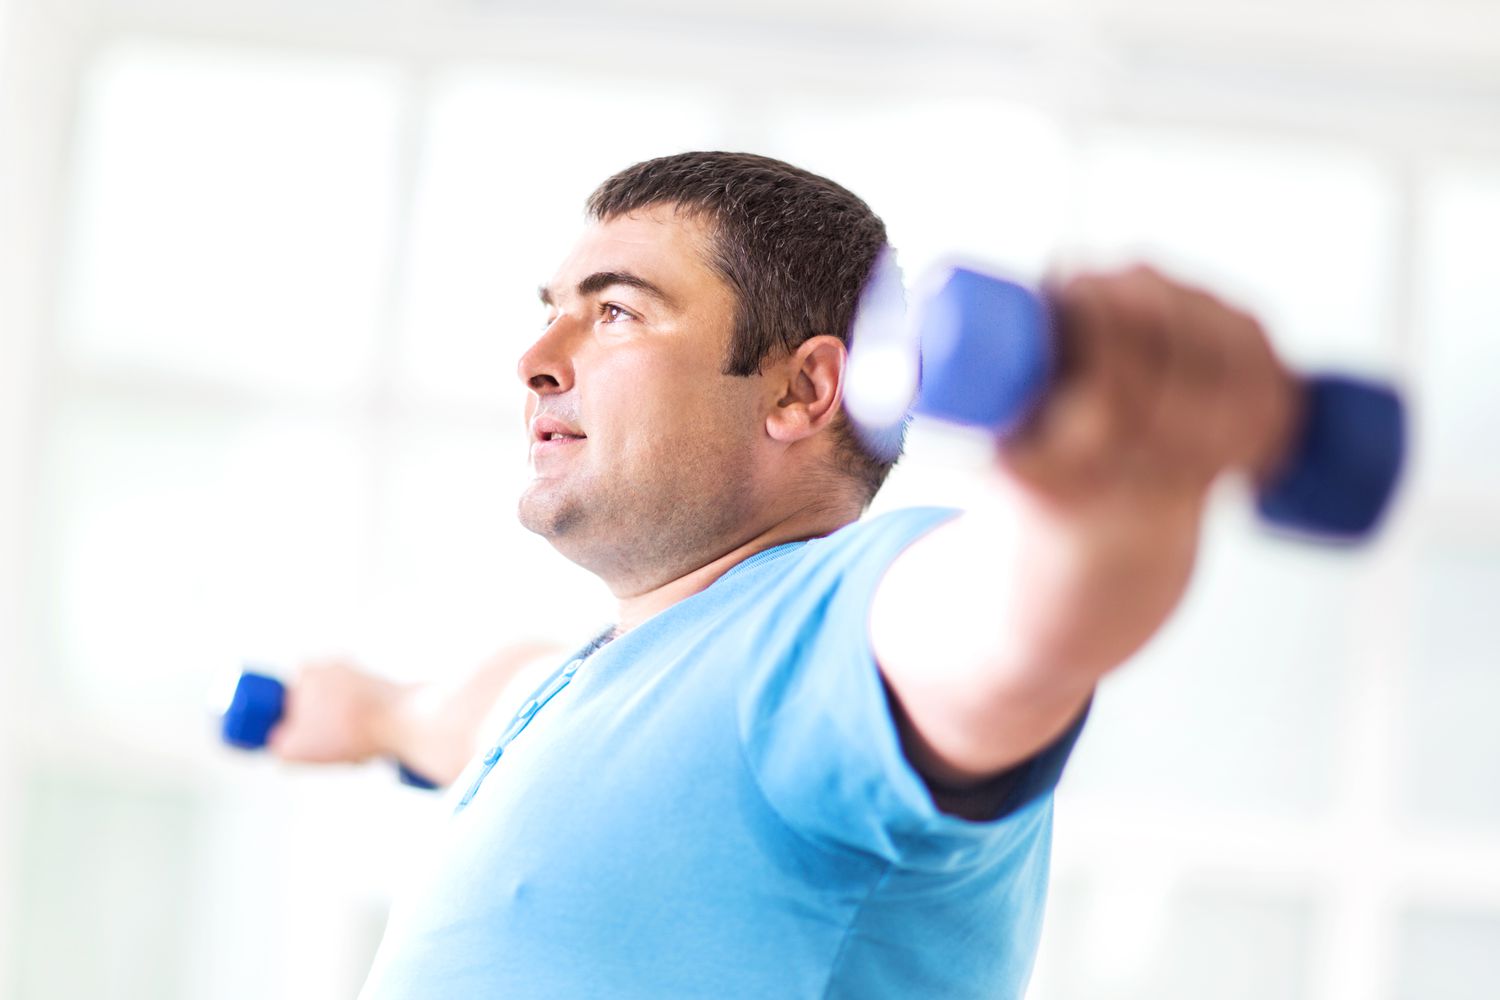 man exercising with dumbbells.